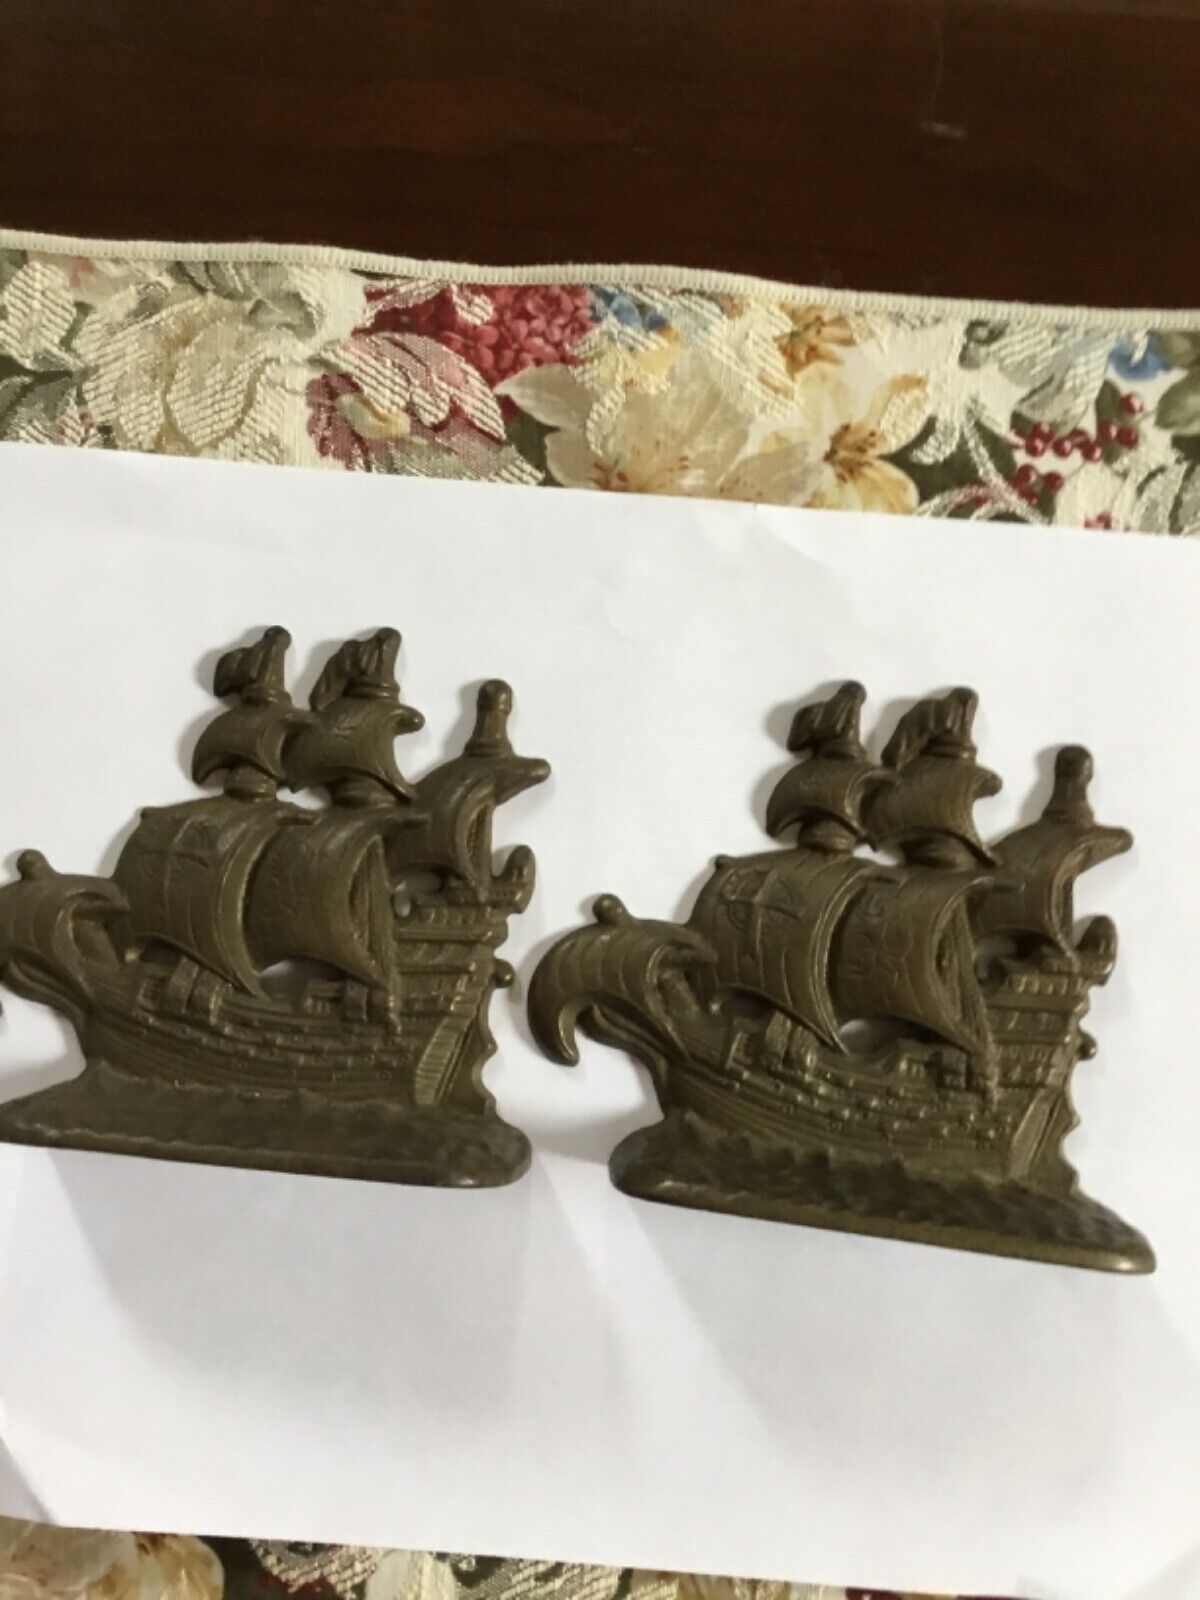 VINTAGE 1920s ANTIQUE BRASS CAST METAL HEAVY PIRATE CLIPPER SHIPS BOOK ENDS PAIR